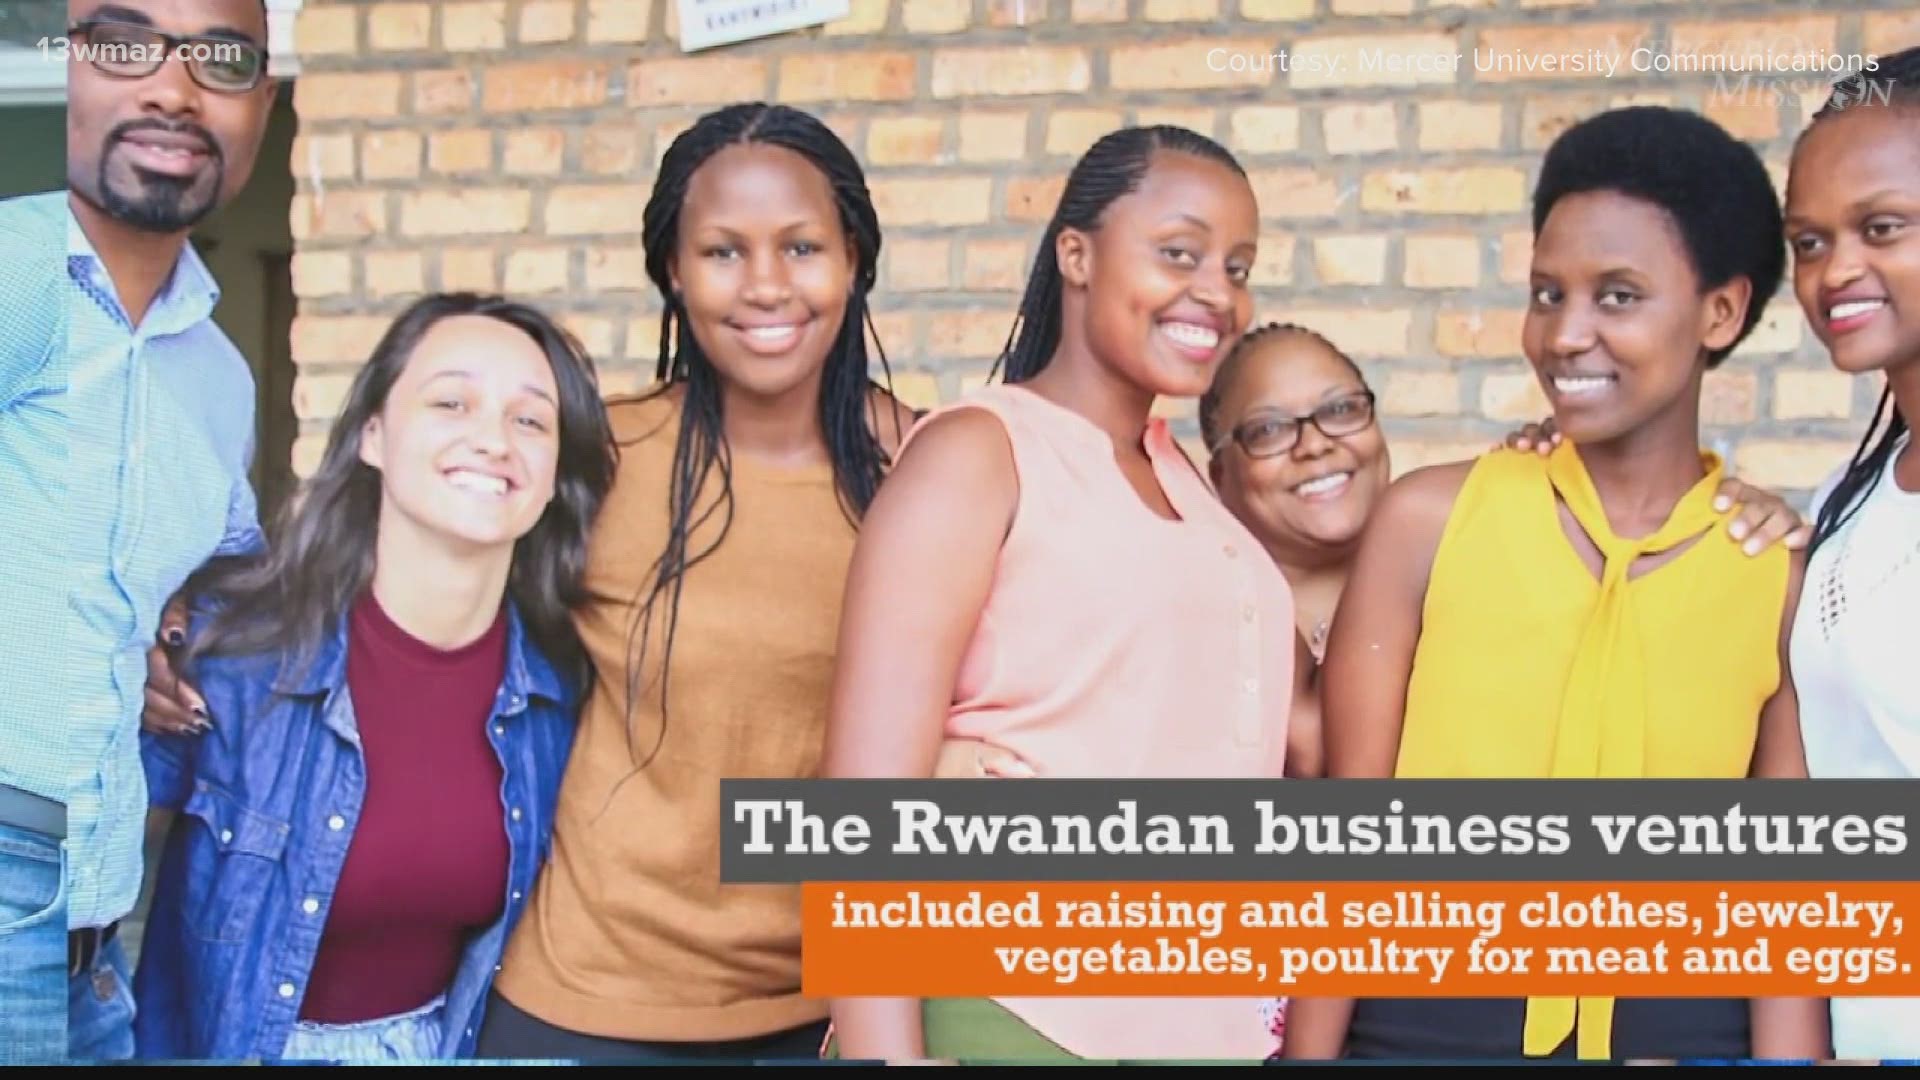 Mercer students have been going to Rwanda to work with agencies, establish entrepreneurship programs, and help widows and orphans start small businesses.